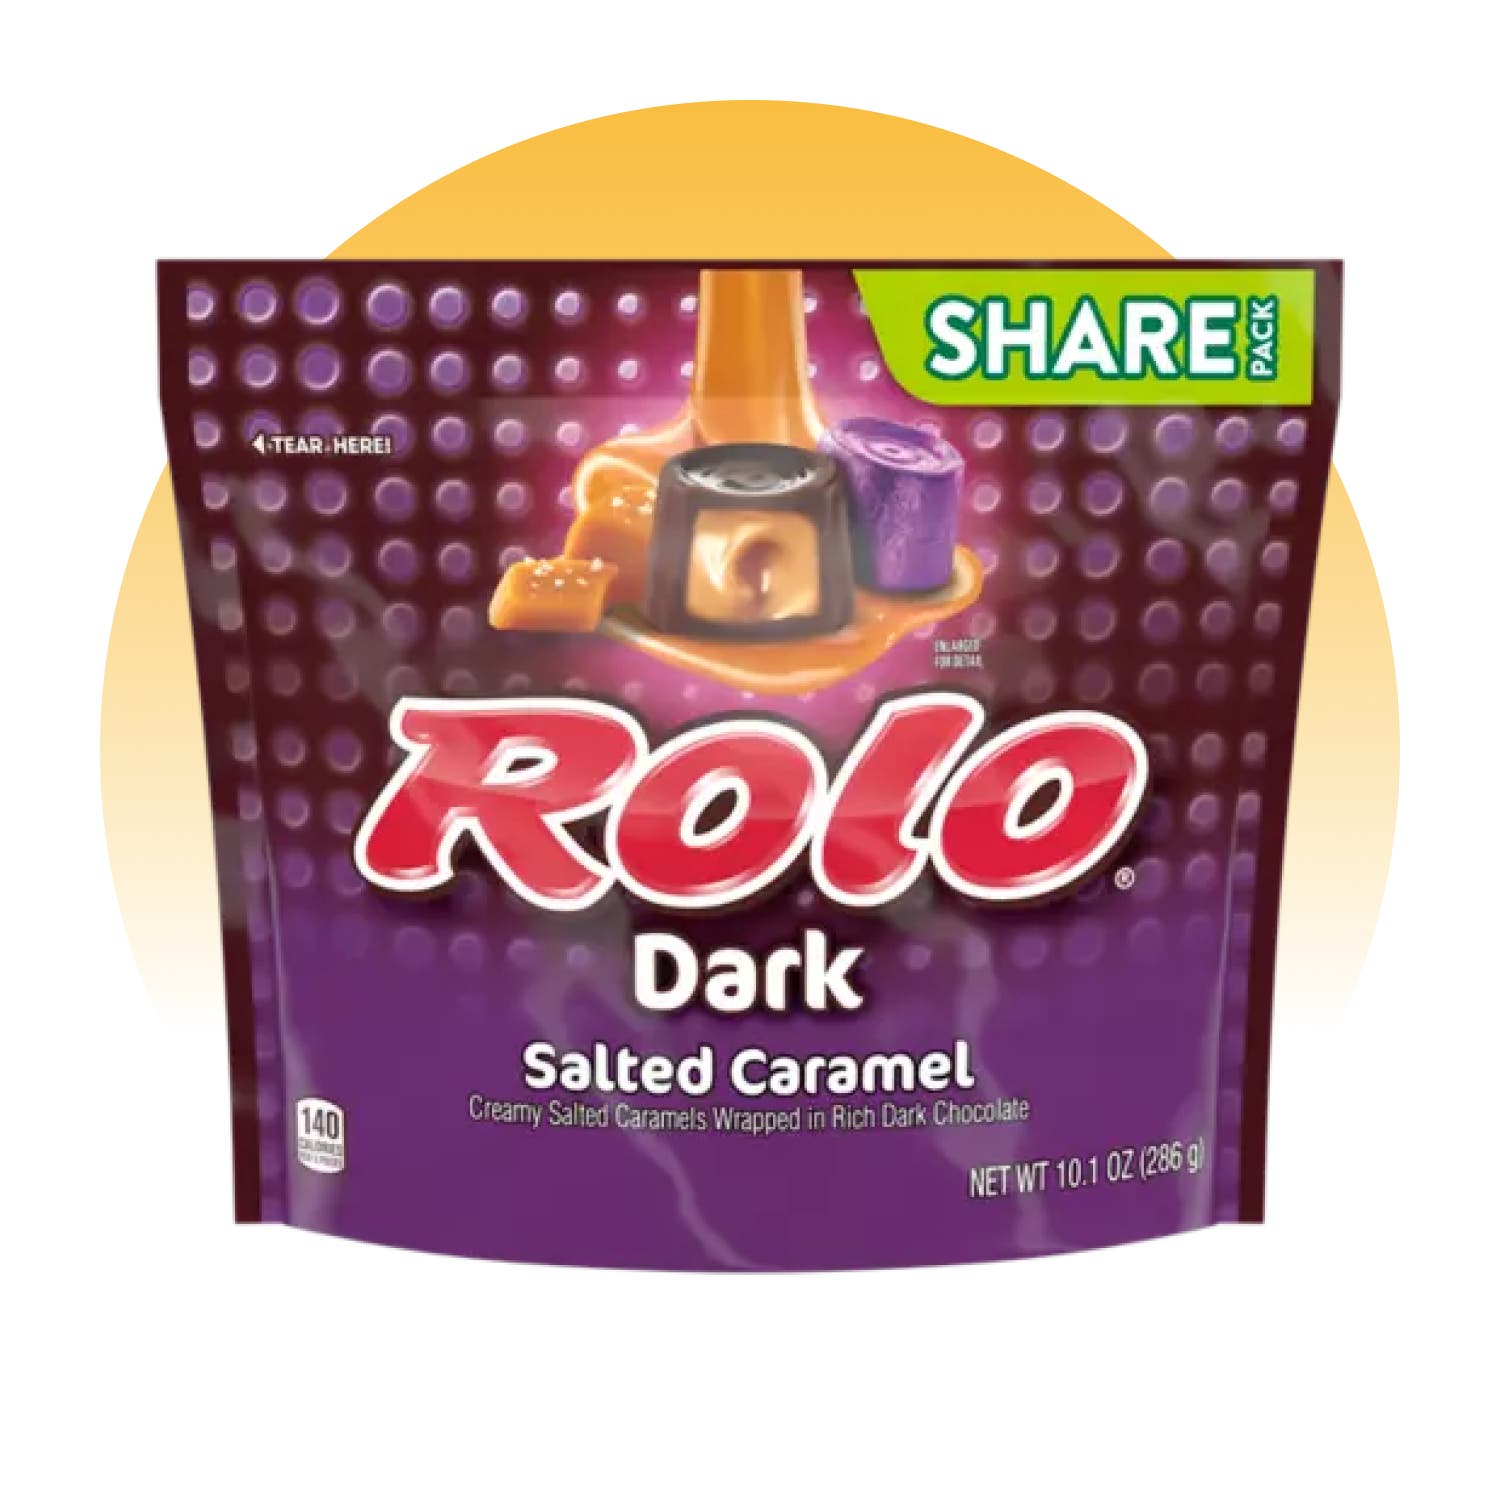 bag of rolo dark salted caramel in rich chocolate candy